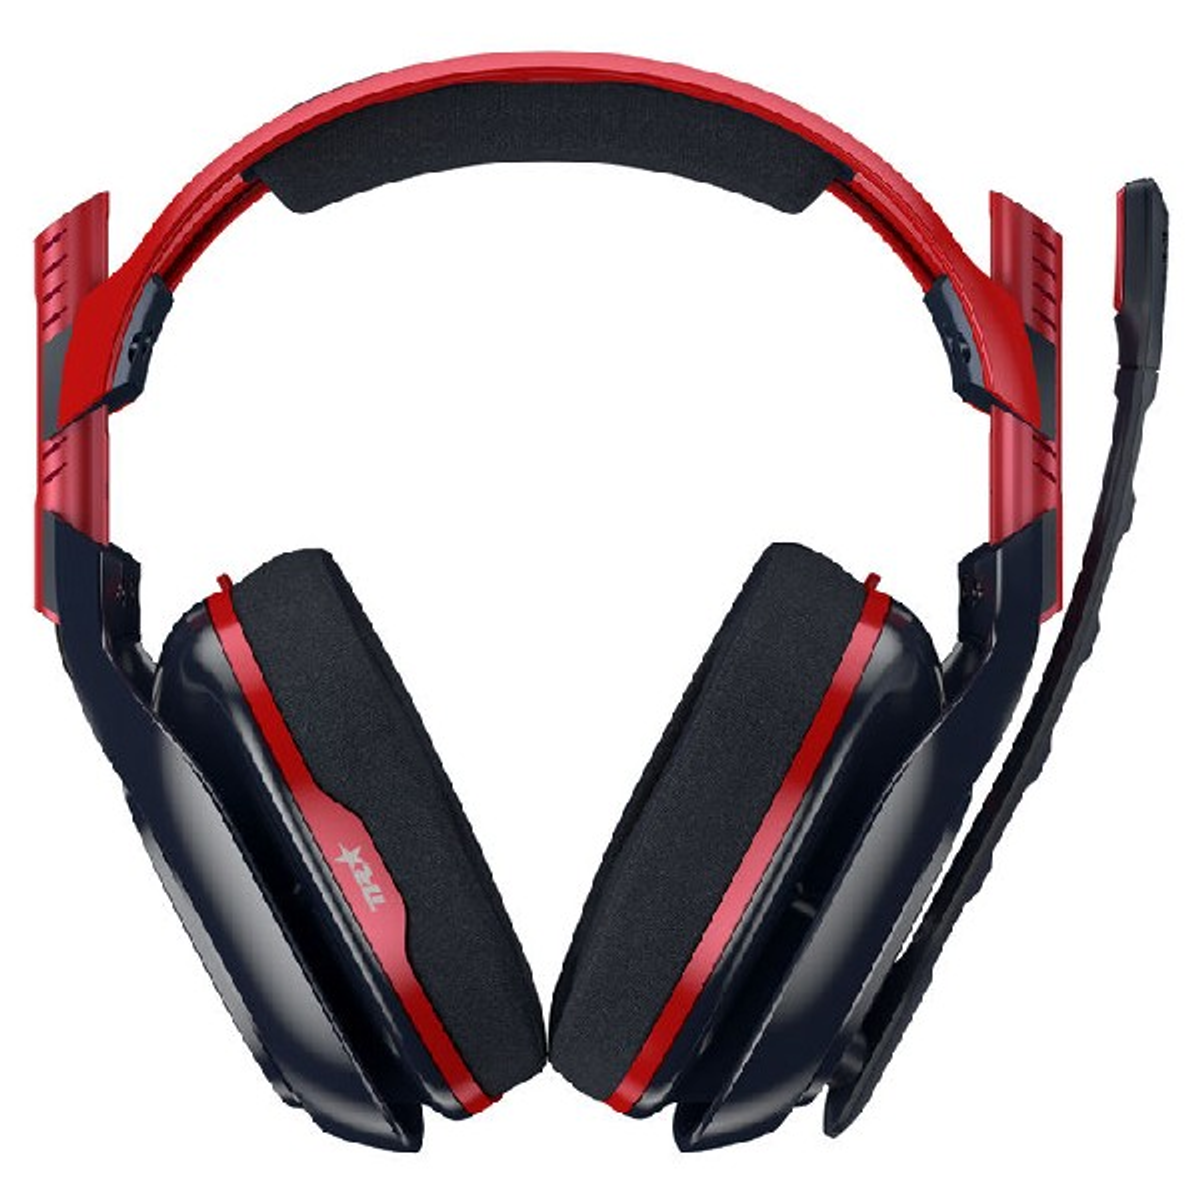 Over-ear Headset ASTRO TR EDS ANNIVERSARY Gaming A40 Rot/Blau 10TH 939-001668 RED/BLUE,